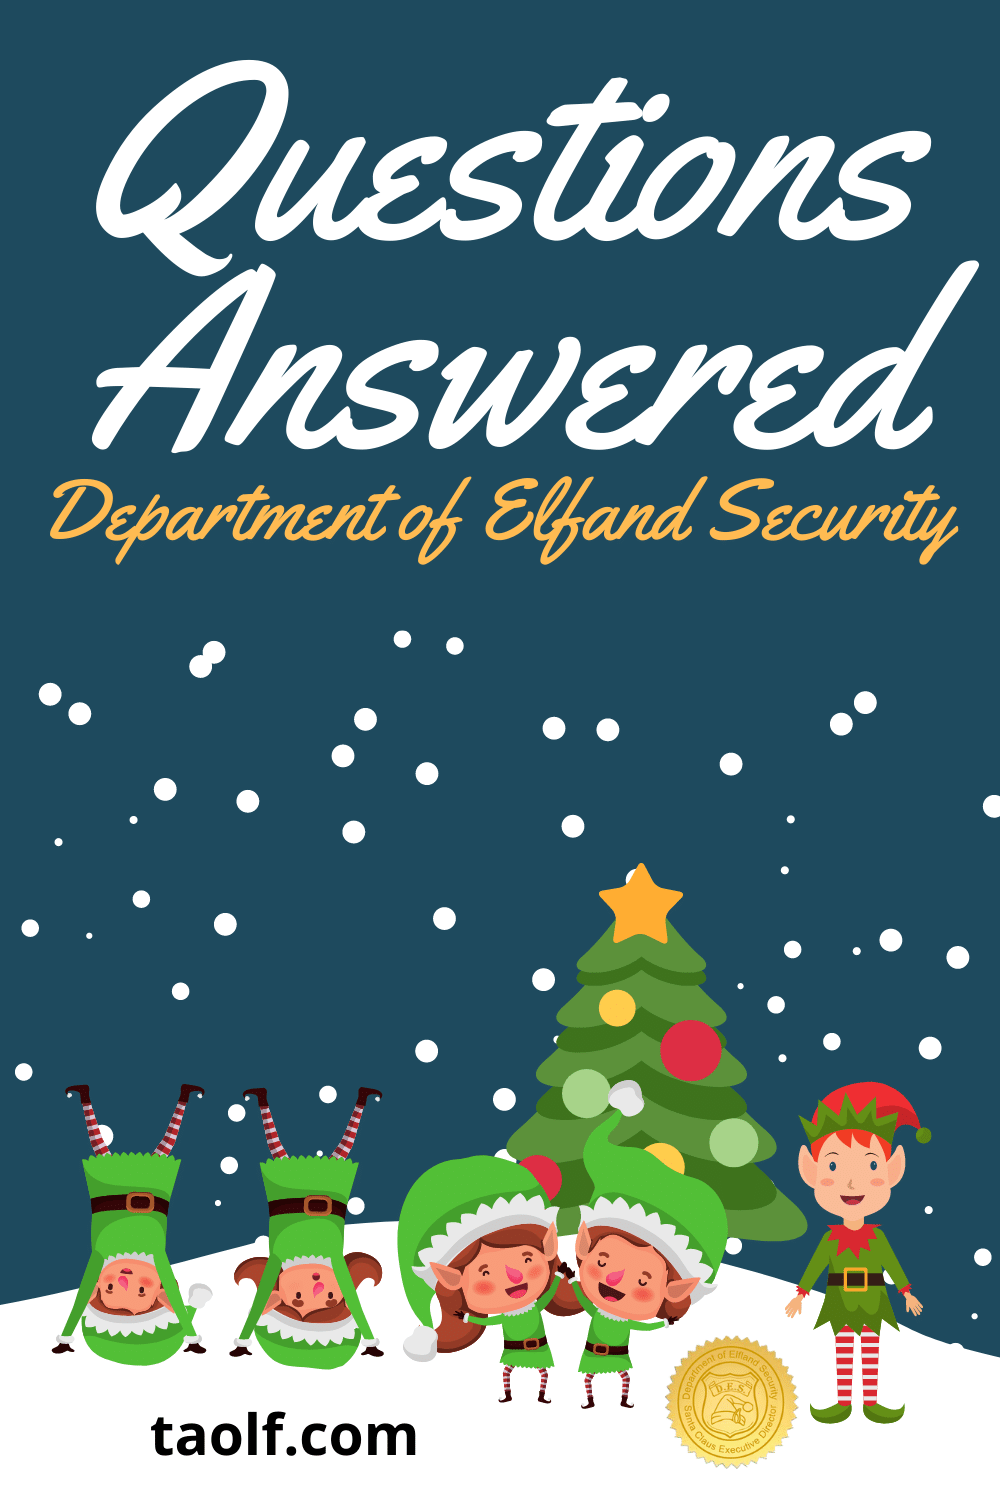 Department of Elfland Security F.A.Q.